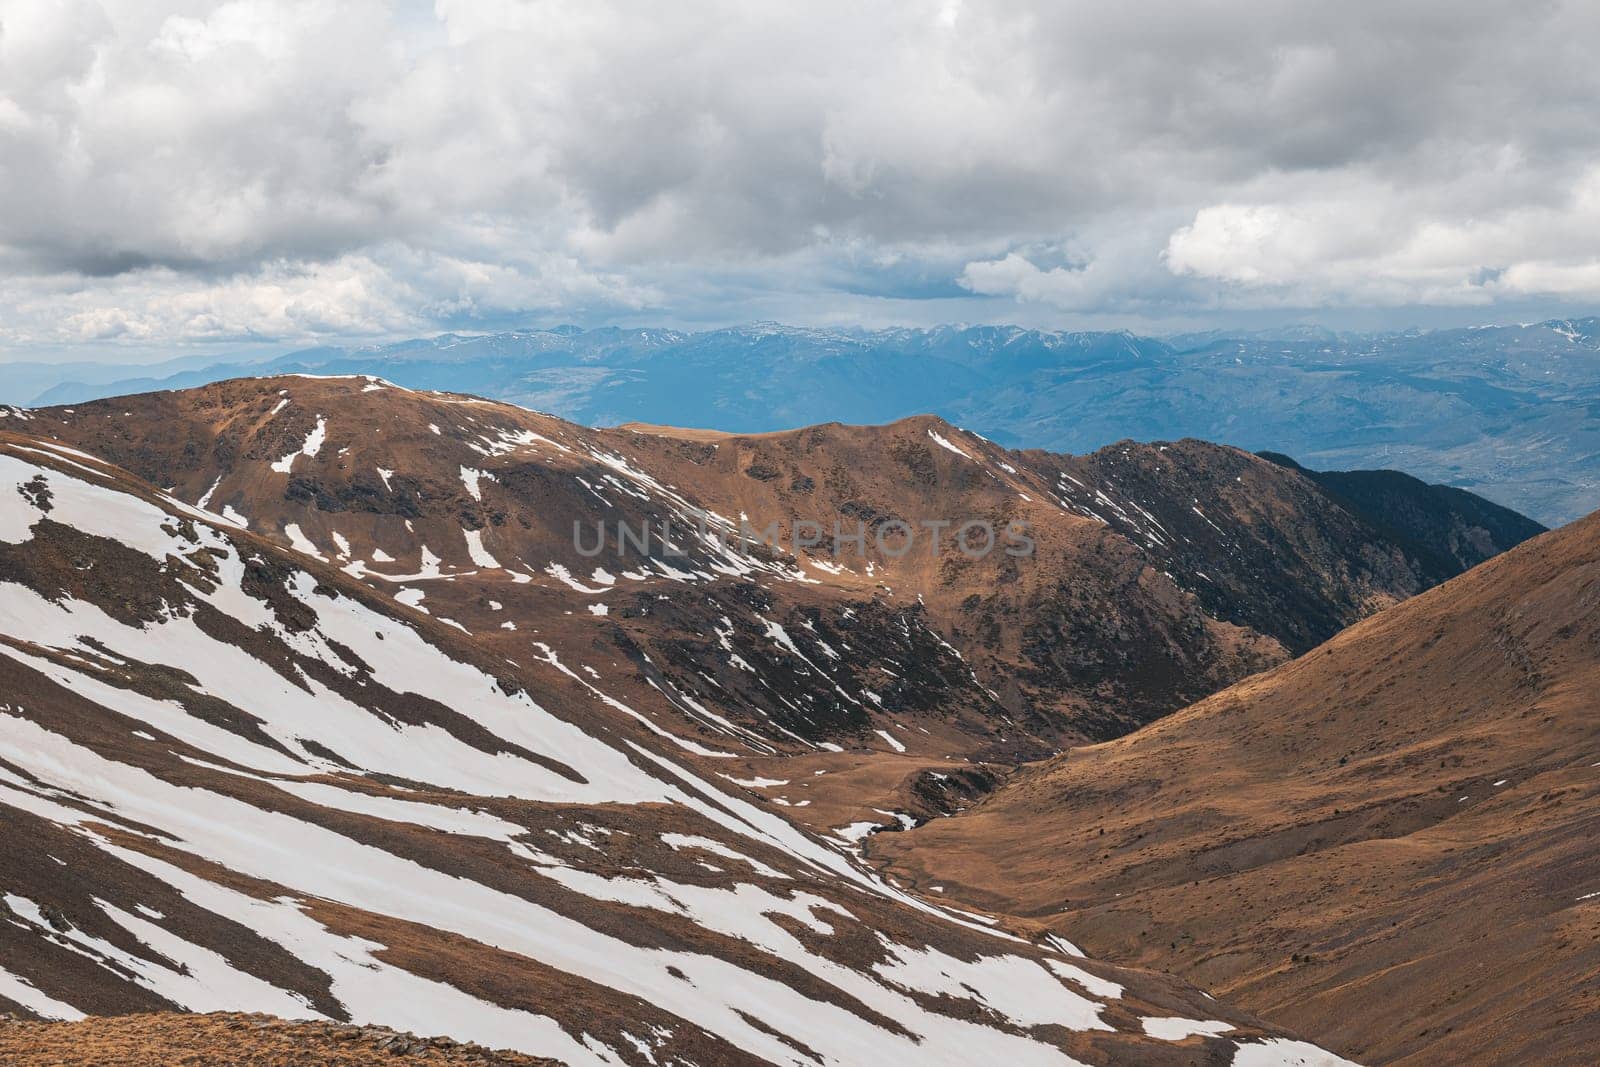 Panoramic view of the high snowy mountain ranges of the Pyrenees on an autumn day on a cloudy sky. Travel concept for climbing and skiing enthusiasts. Copyspace.